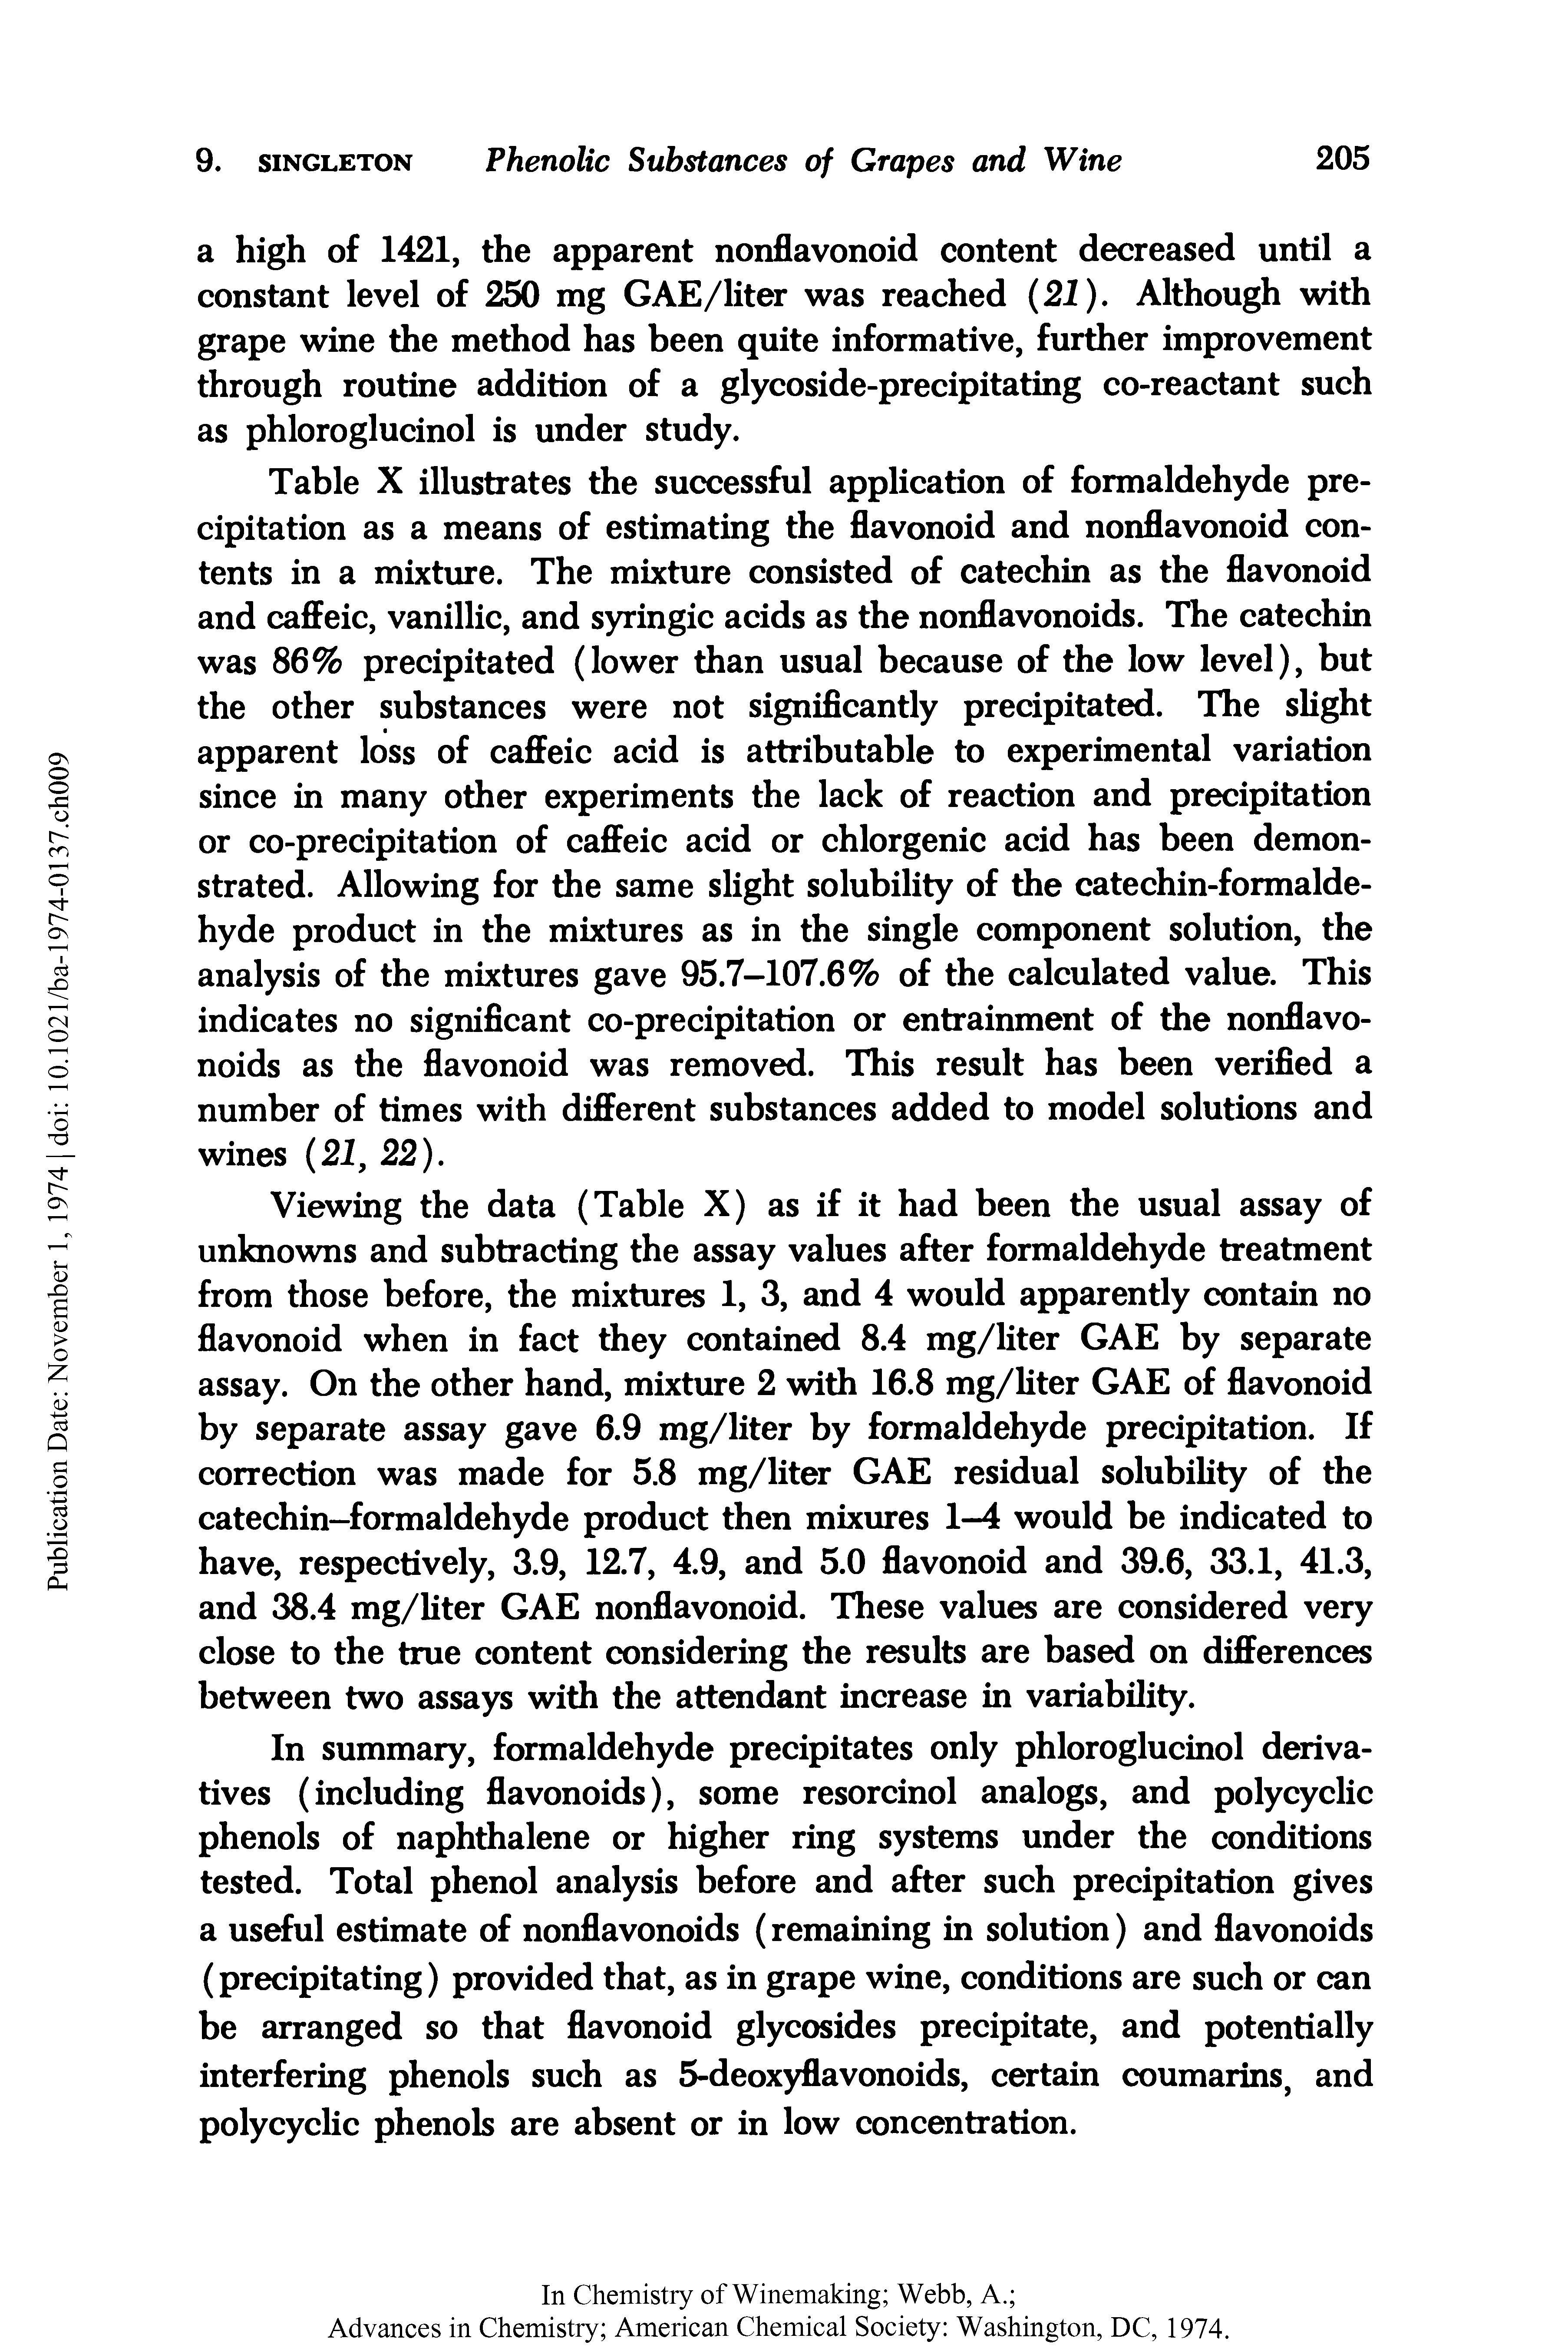 Table X illustrates the successful application of formaldehyde precipitation as a means of estimating the flavonoid and nonflavonoid contents in a mixture. The mixture consisted of catechin as the flavonoid and caffeic, vanillic, and syringic acids as the nonflavonoids. The catechin was 86% precipitated (lower than usual because of the low level), but the other substances were not significantly precipitated. The slight apparent loss of caffeic acid is attributable to experimental variation since in many other experiments the lack of reaction and precipitation or co-precipitation of caffeic acid or chlorgenic acid has been demonstrated. Allowing for the same slight solubility of the catechin-formalde-hyde product in the mixtures as in the single component solution, the analysis of the mixtures gave 95.7-107.6% of the calculated value. This indicates no significant co-precipitation or entrainment of the nonflavonoids as the flavonoid was removed. This result has been verified a number of times with different substances added to model solutions and wines (21, 22).